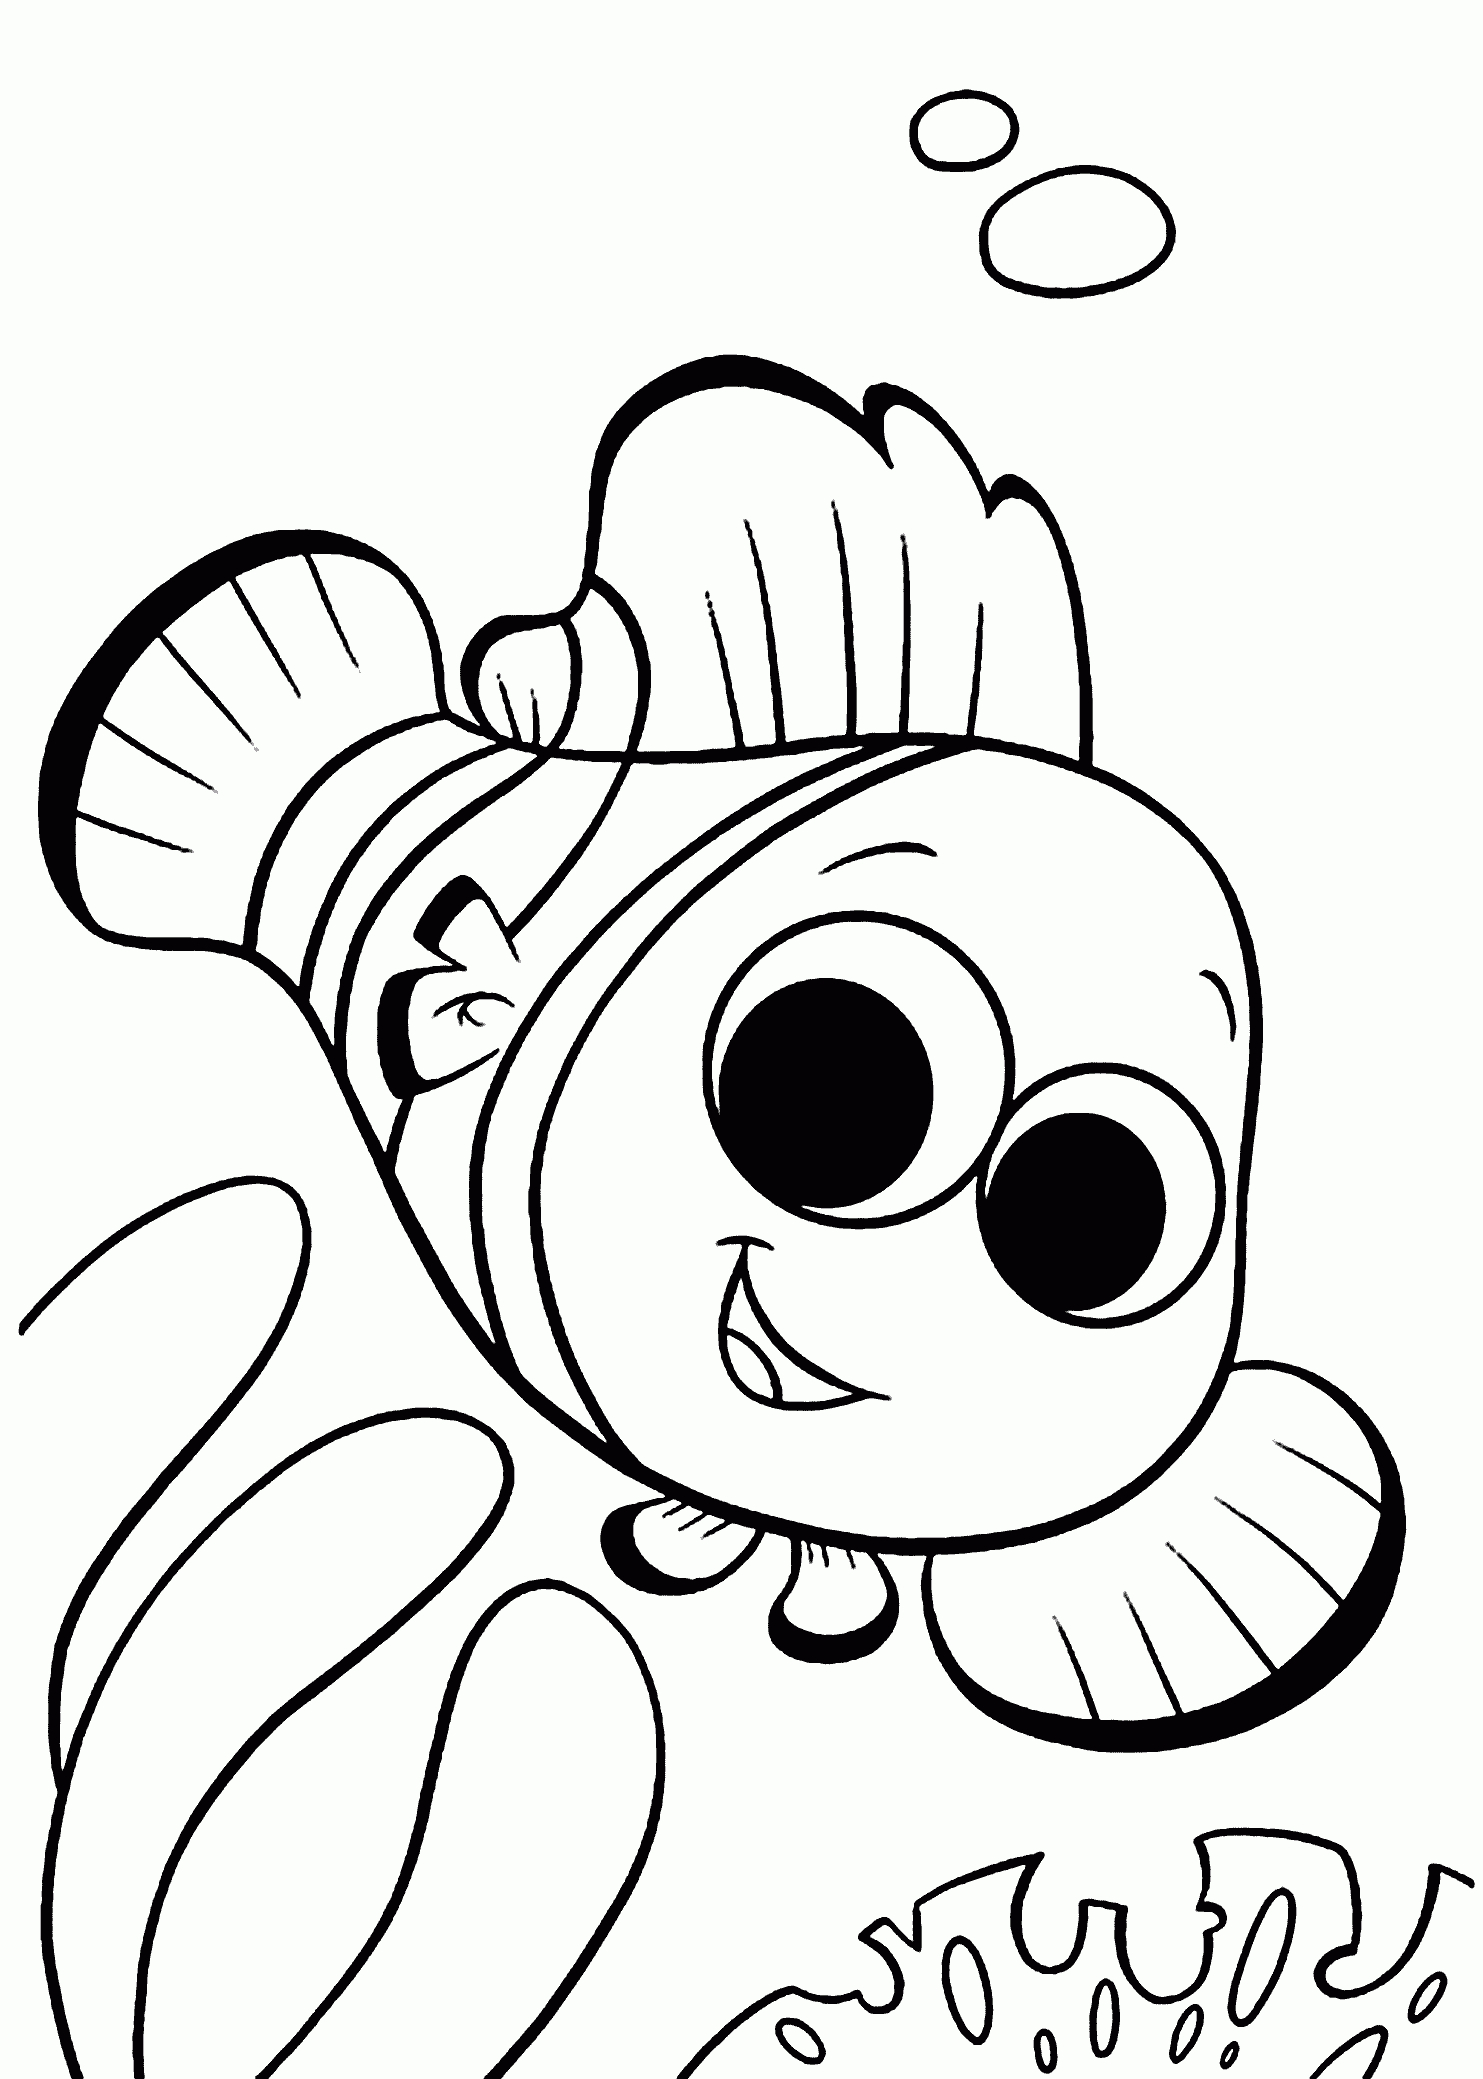 Finding Nemo Coloring Pages For Kids, Printable Free | Lets Get - Free Printable Coloring Pages For Kids